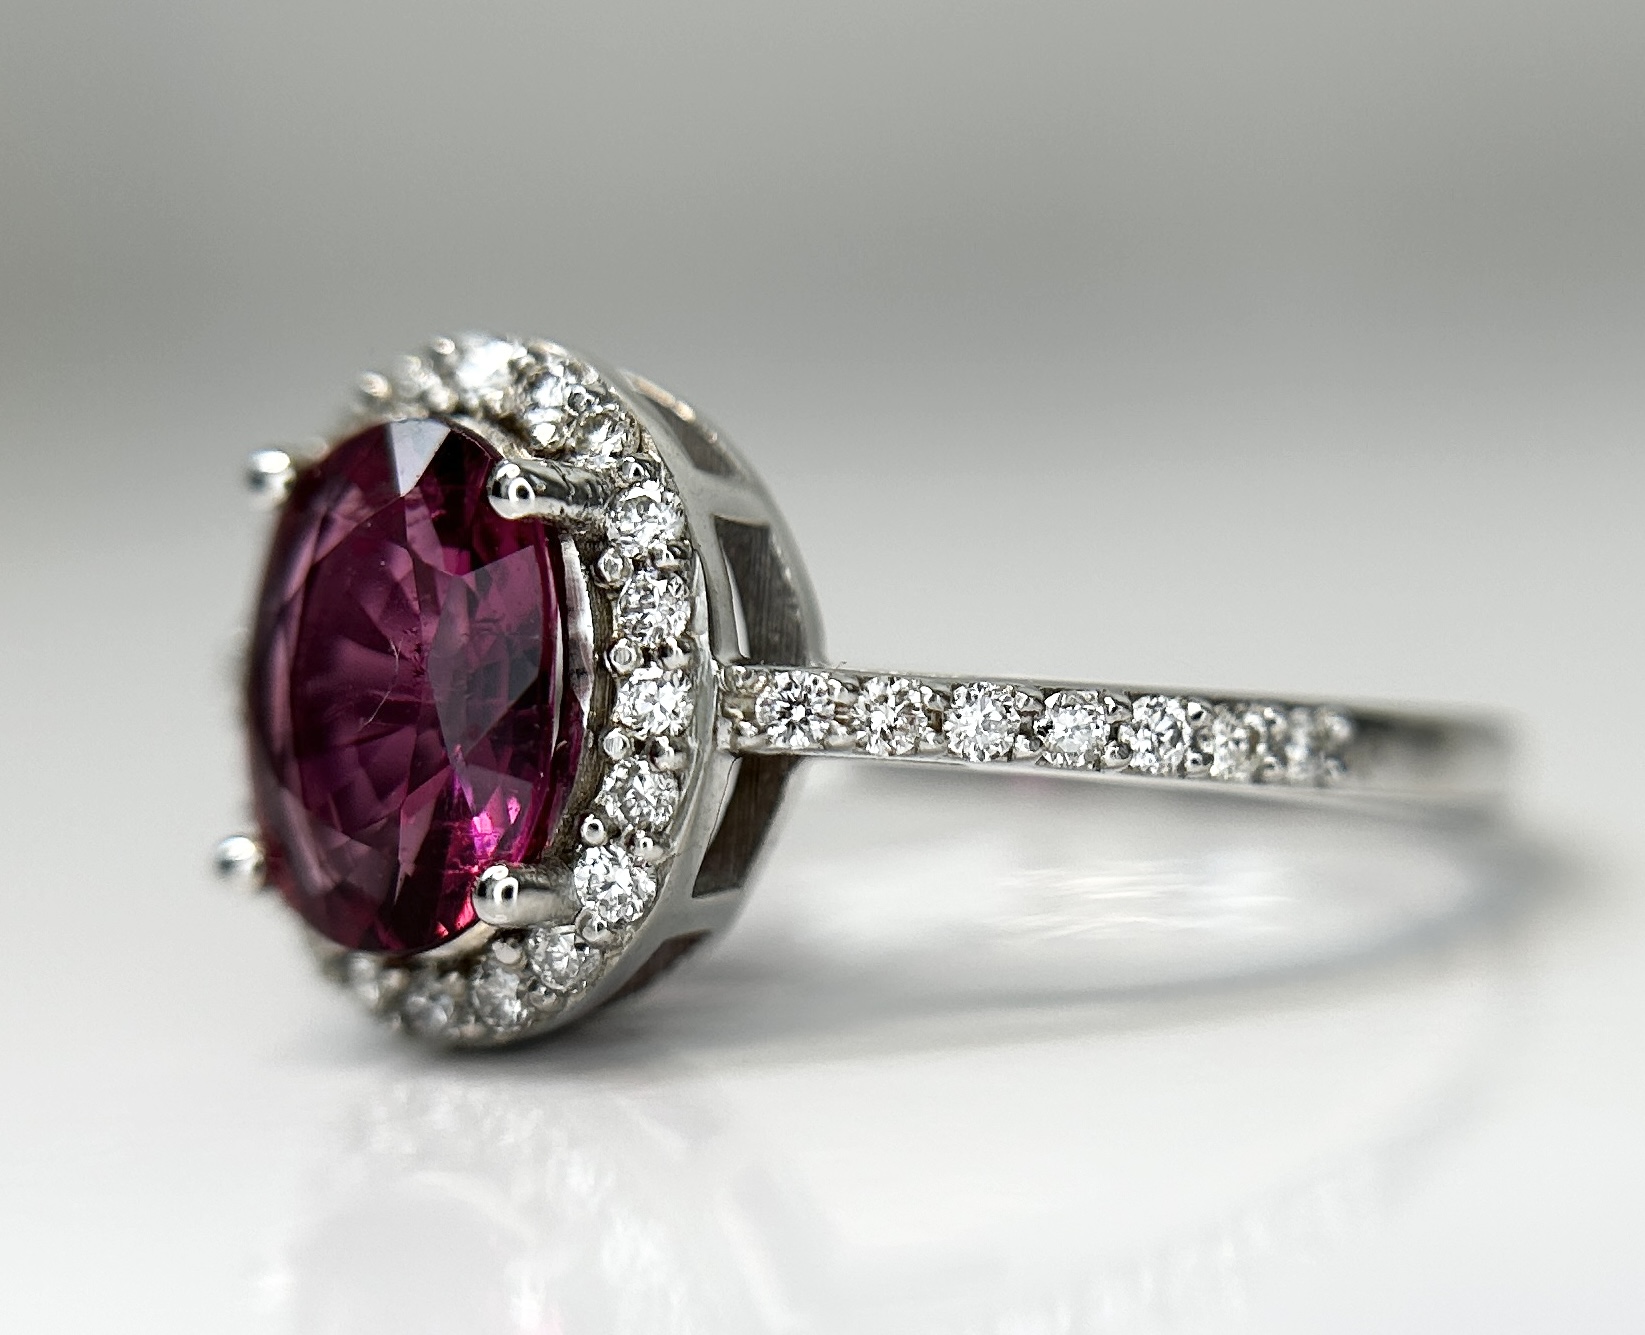 Beautiful Natural Tourmaline Rubellite Ring With Diamonds and 18k Gold - Image 3 of 8